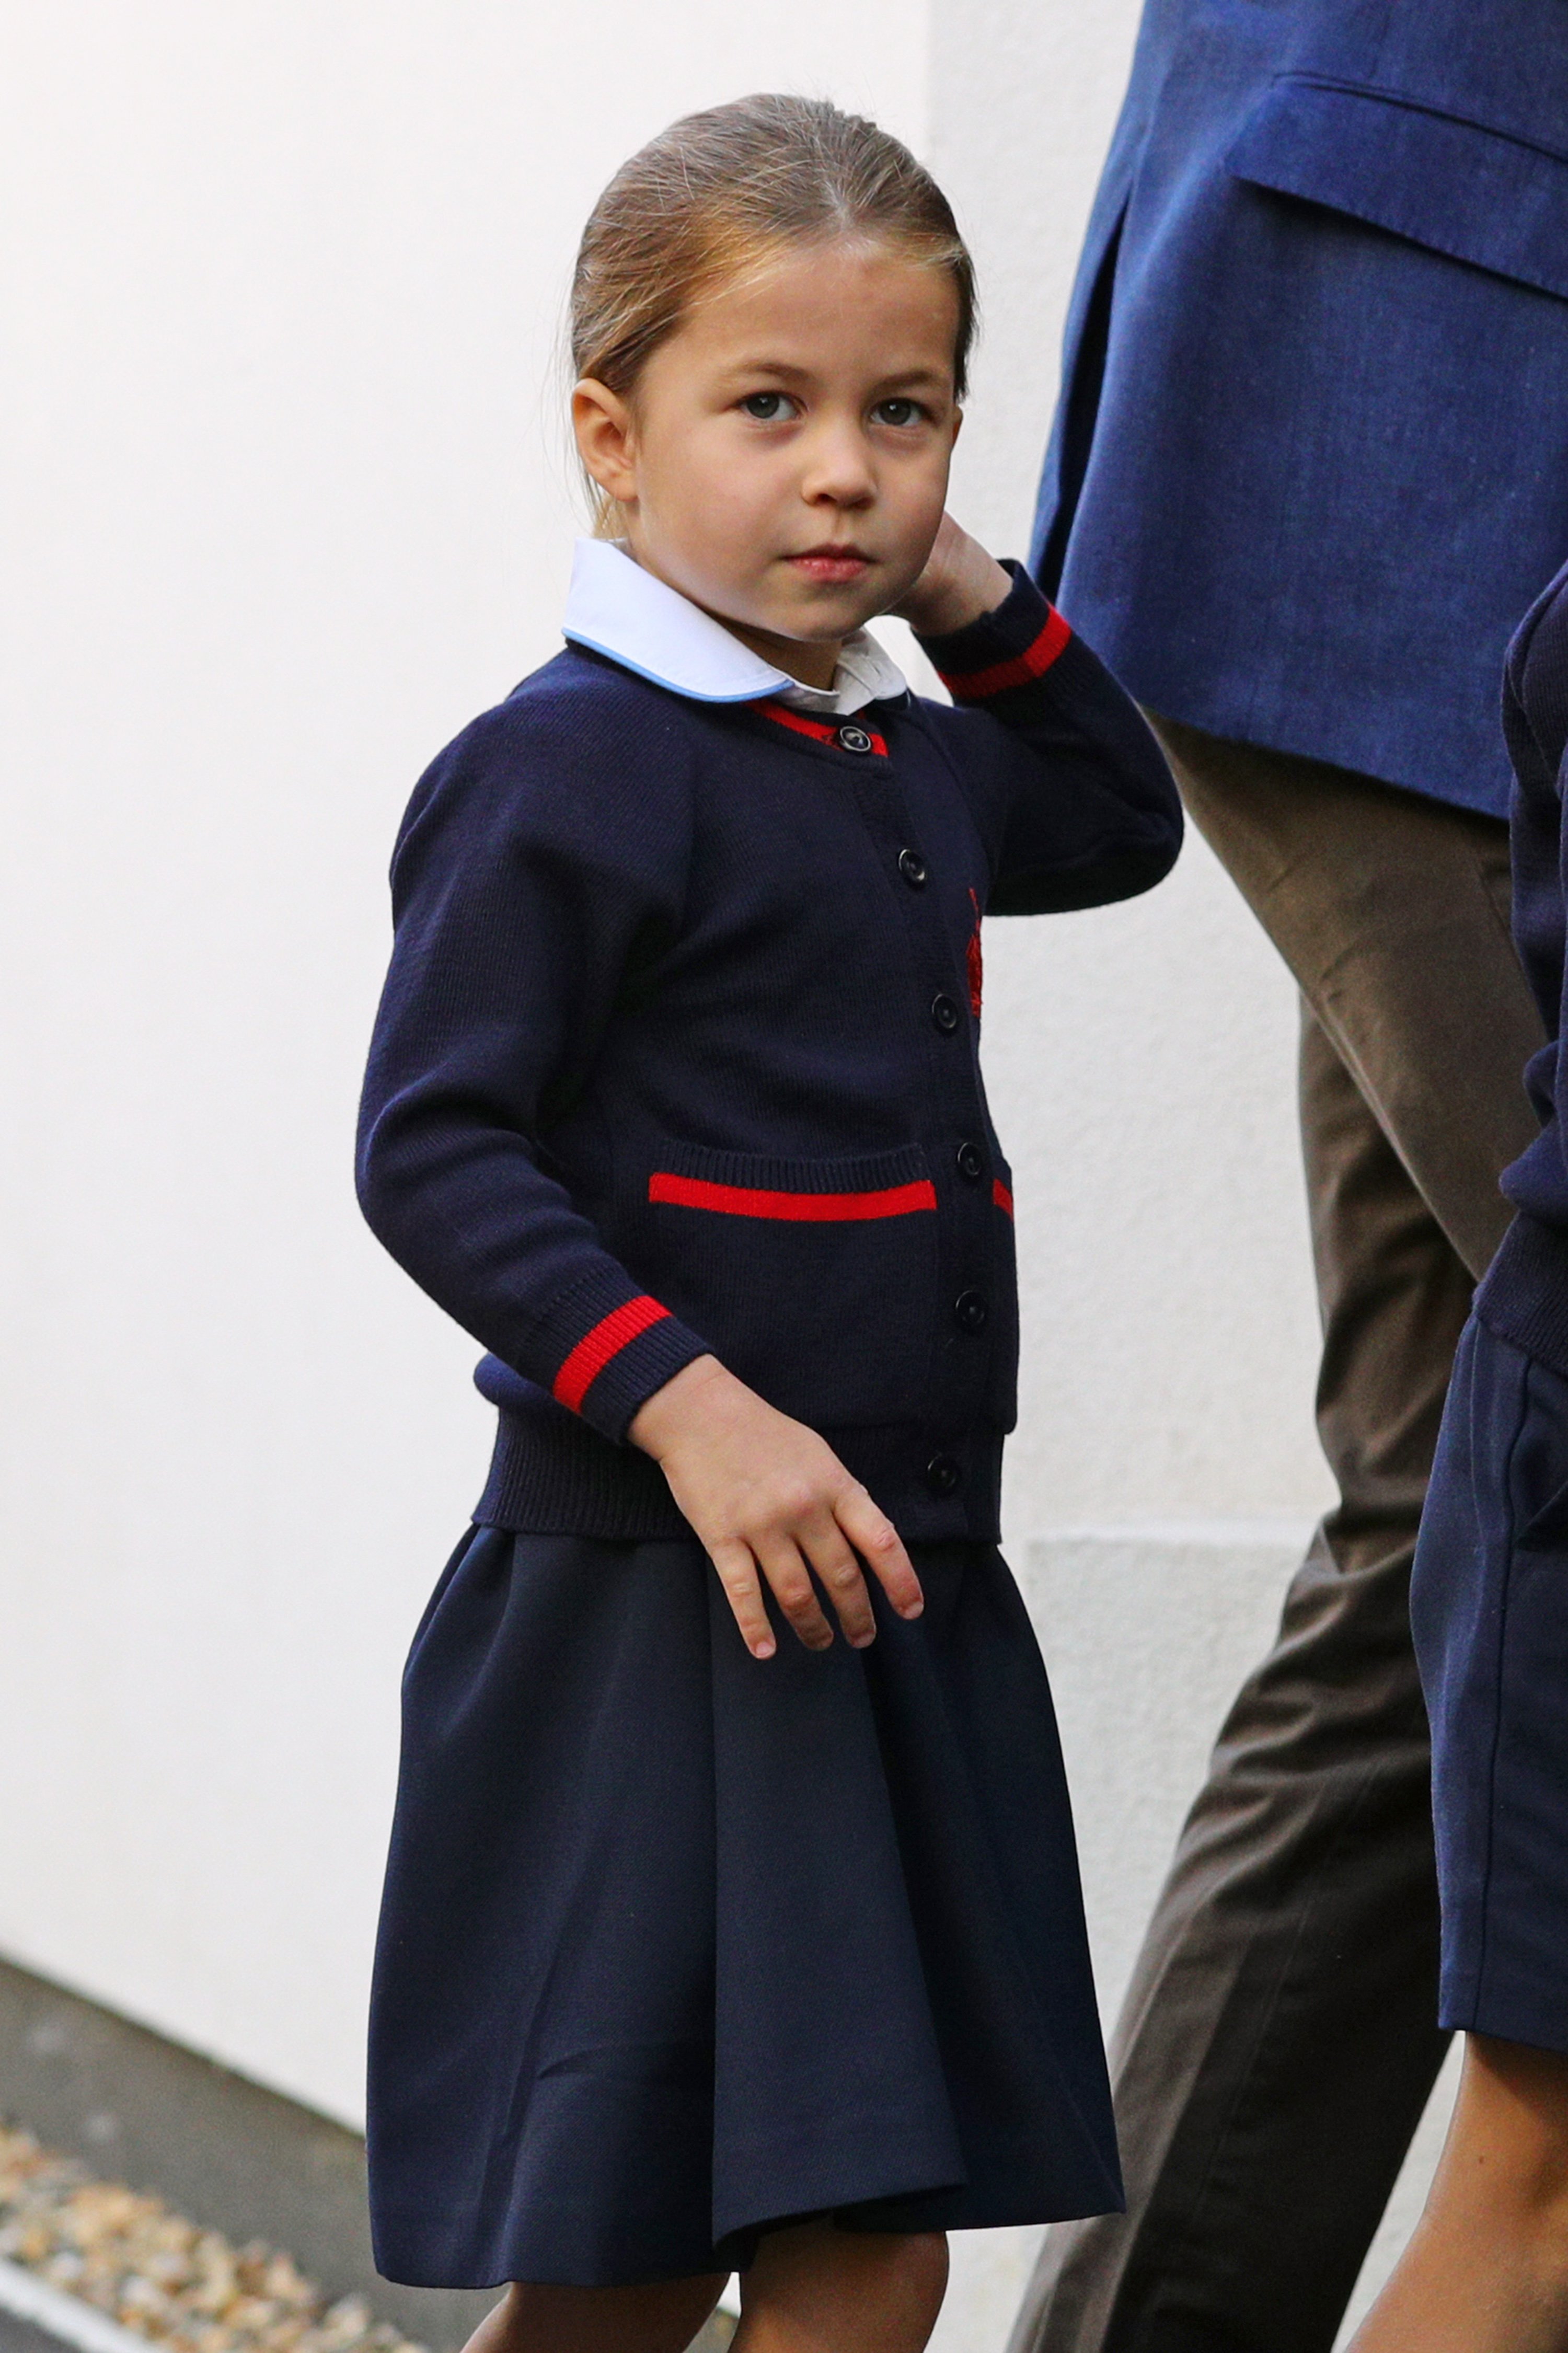 Princess Charlotte arrives for her first day of school at Thomas's Battersea in London on September 5, 2019 | Photo: GettyImages